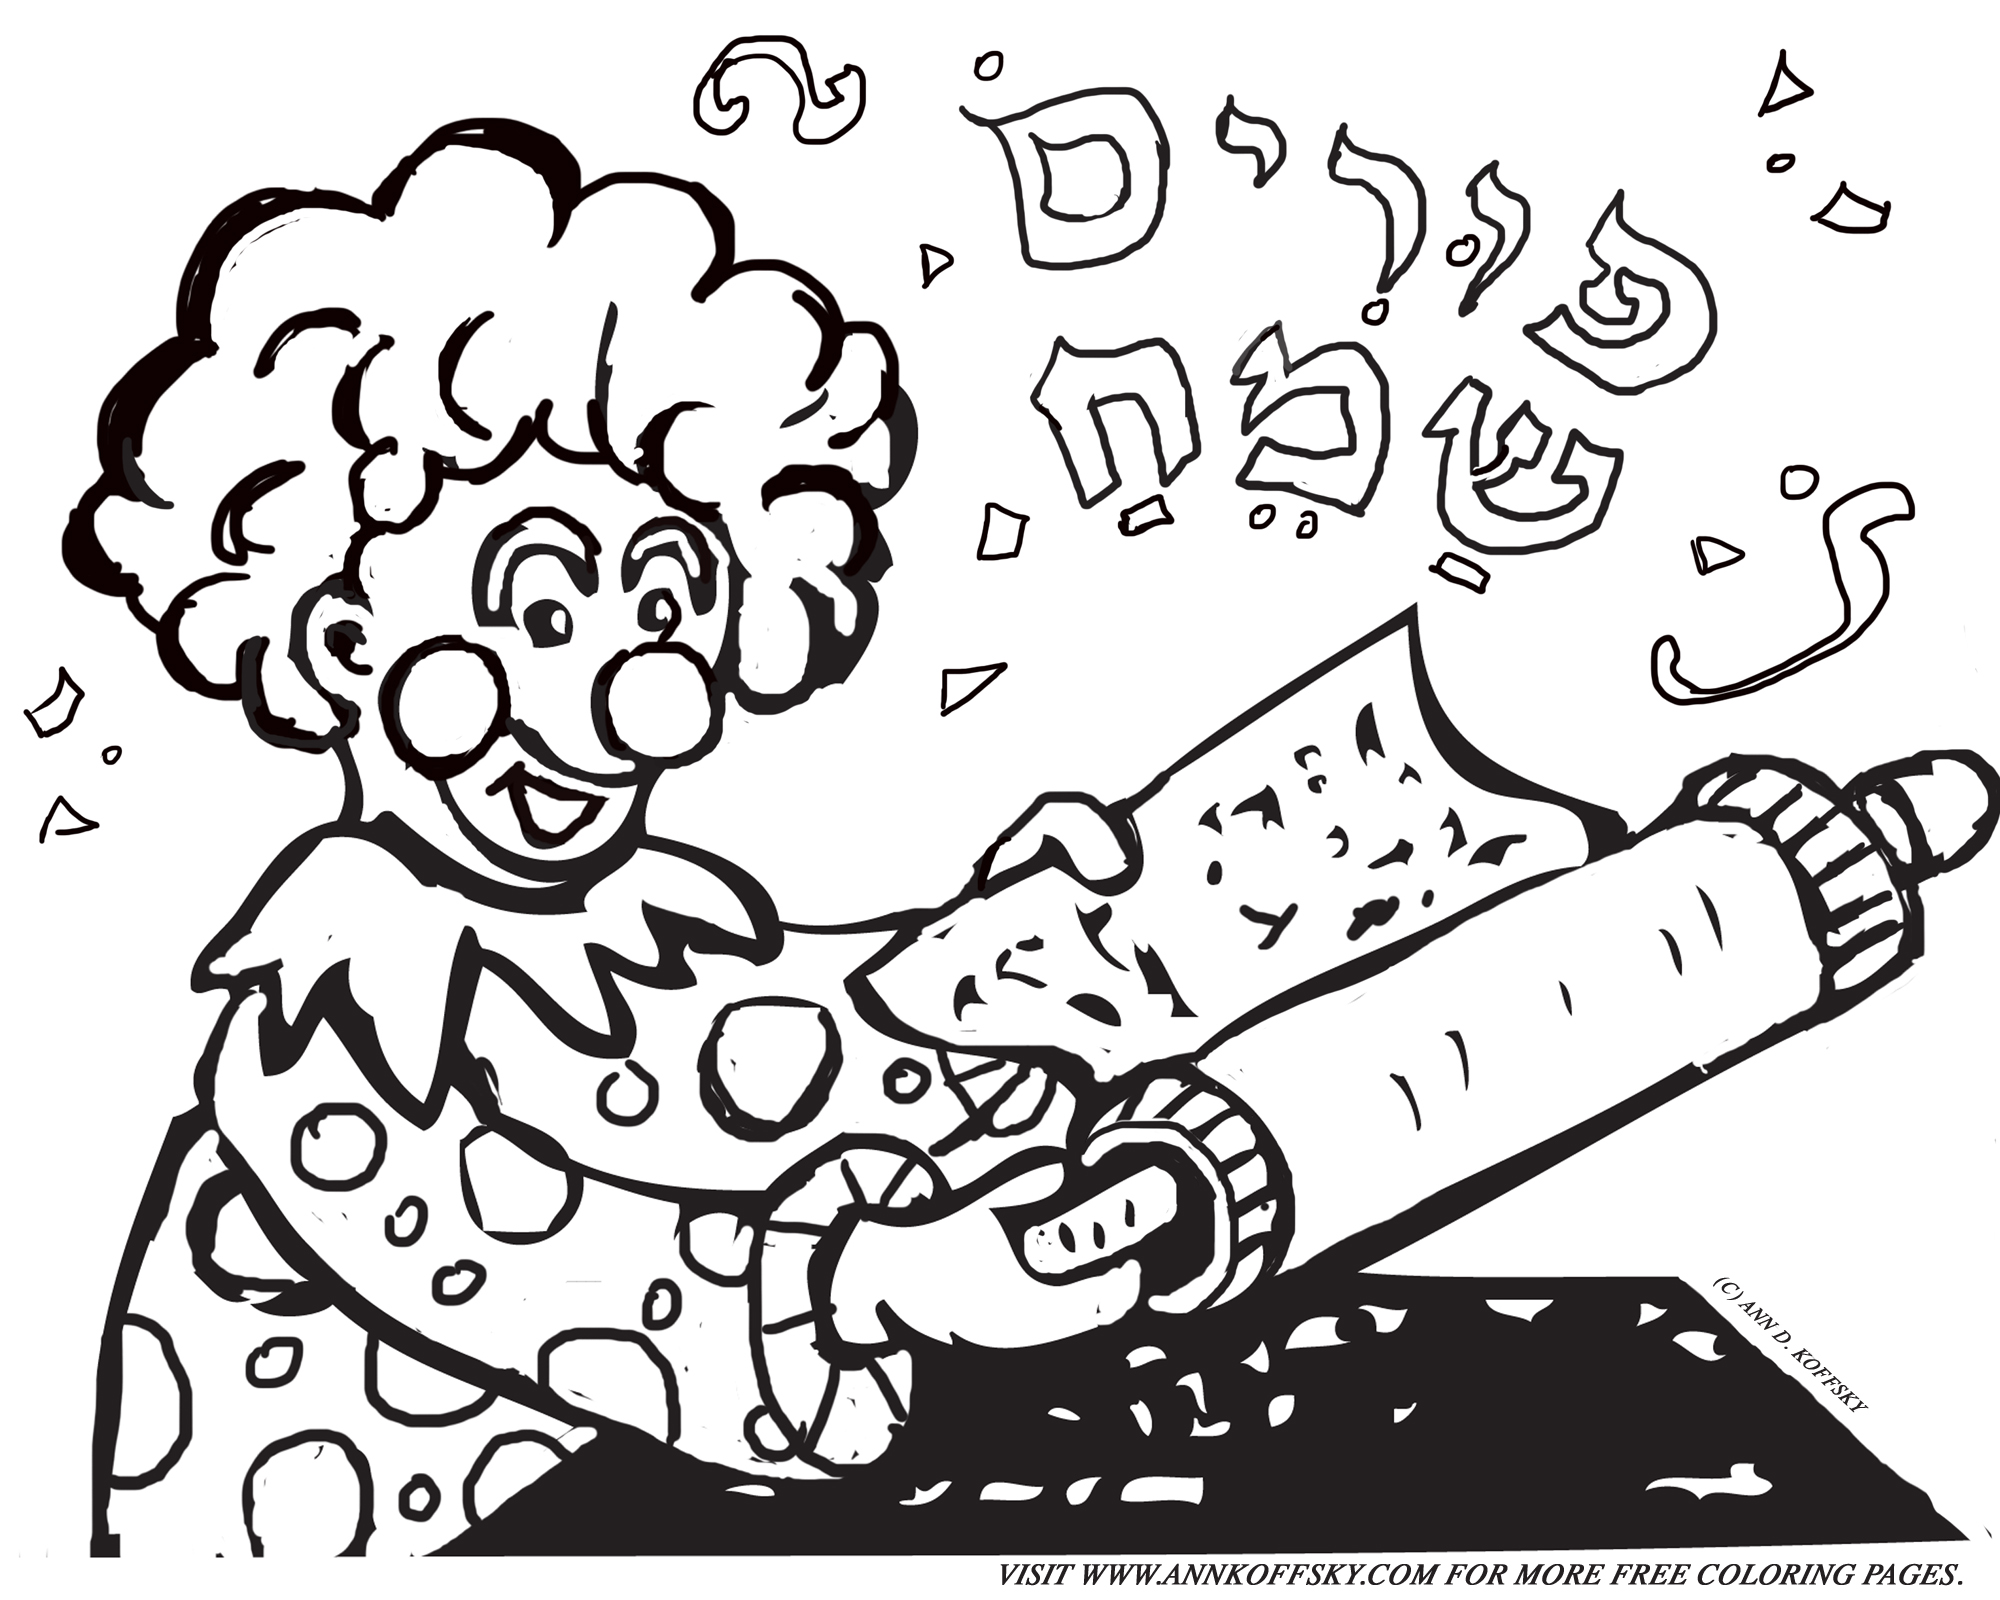 Purim coloring page â ann d koffsky